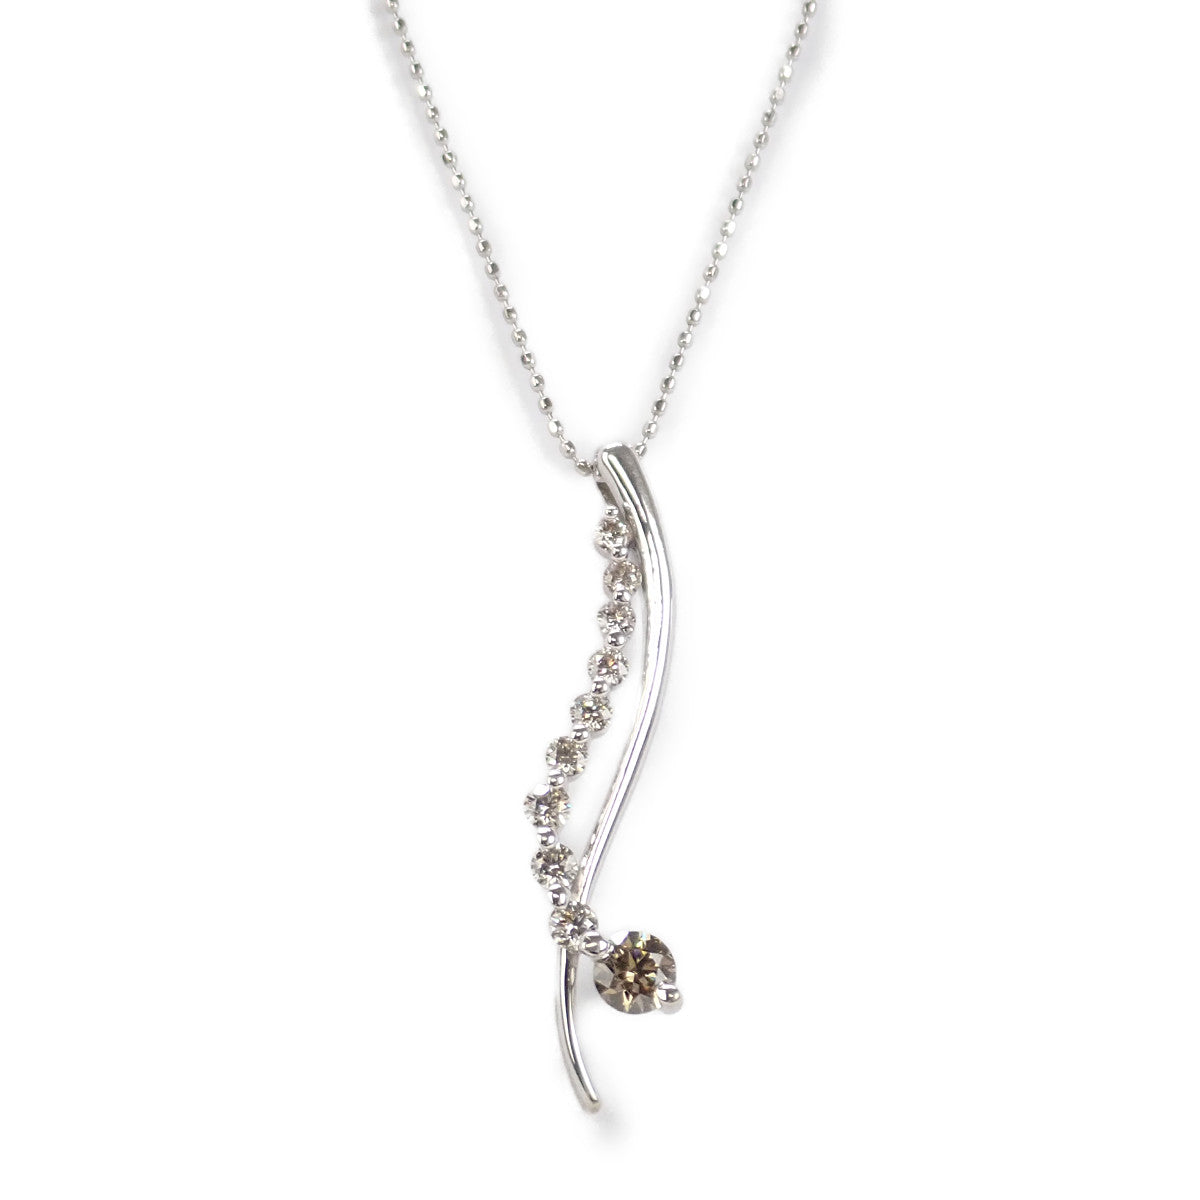 [LuxUness]  Classy D0.31/0.25ct Necklace - K18 White Gold with Diamond, Silver For Women【Pre-Owned】 in Excellent condition